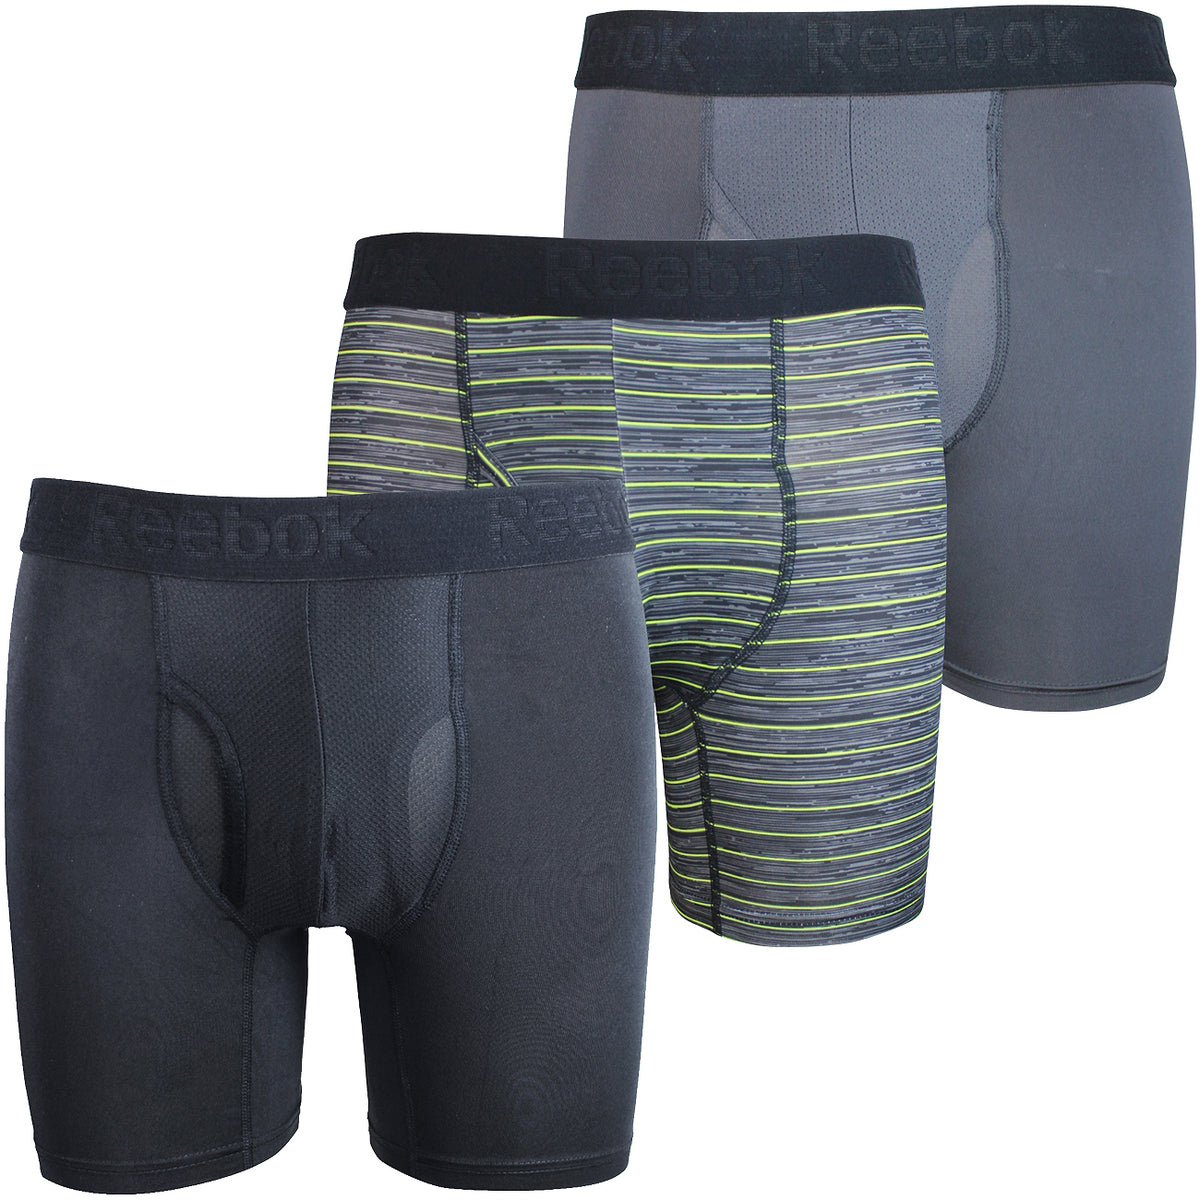 Reebok Mens Performance Training Boxer Briefs Black Lime Green Charcoal Pack of 3